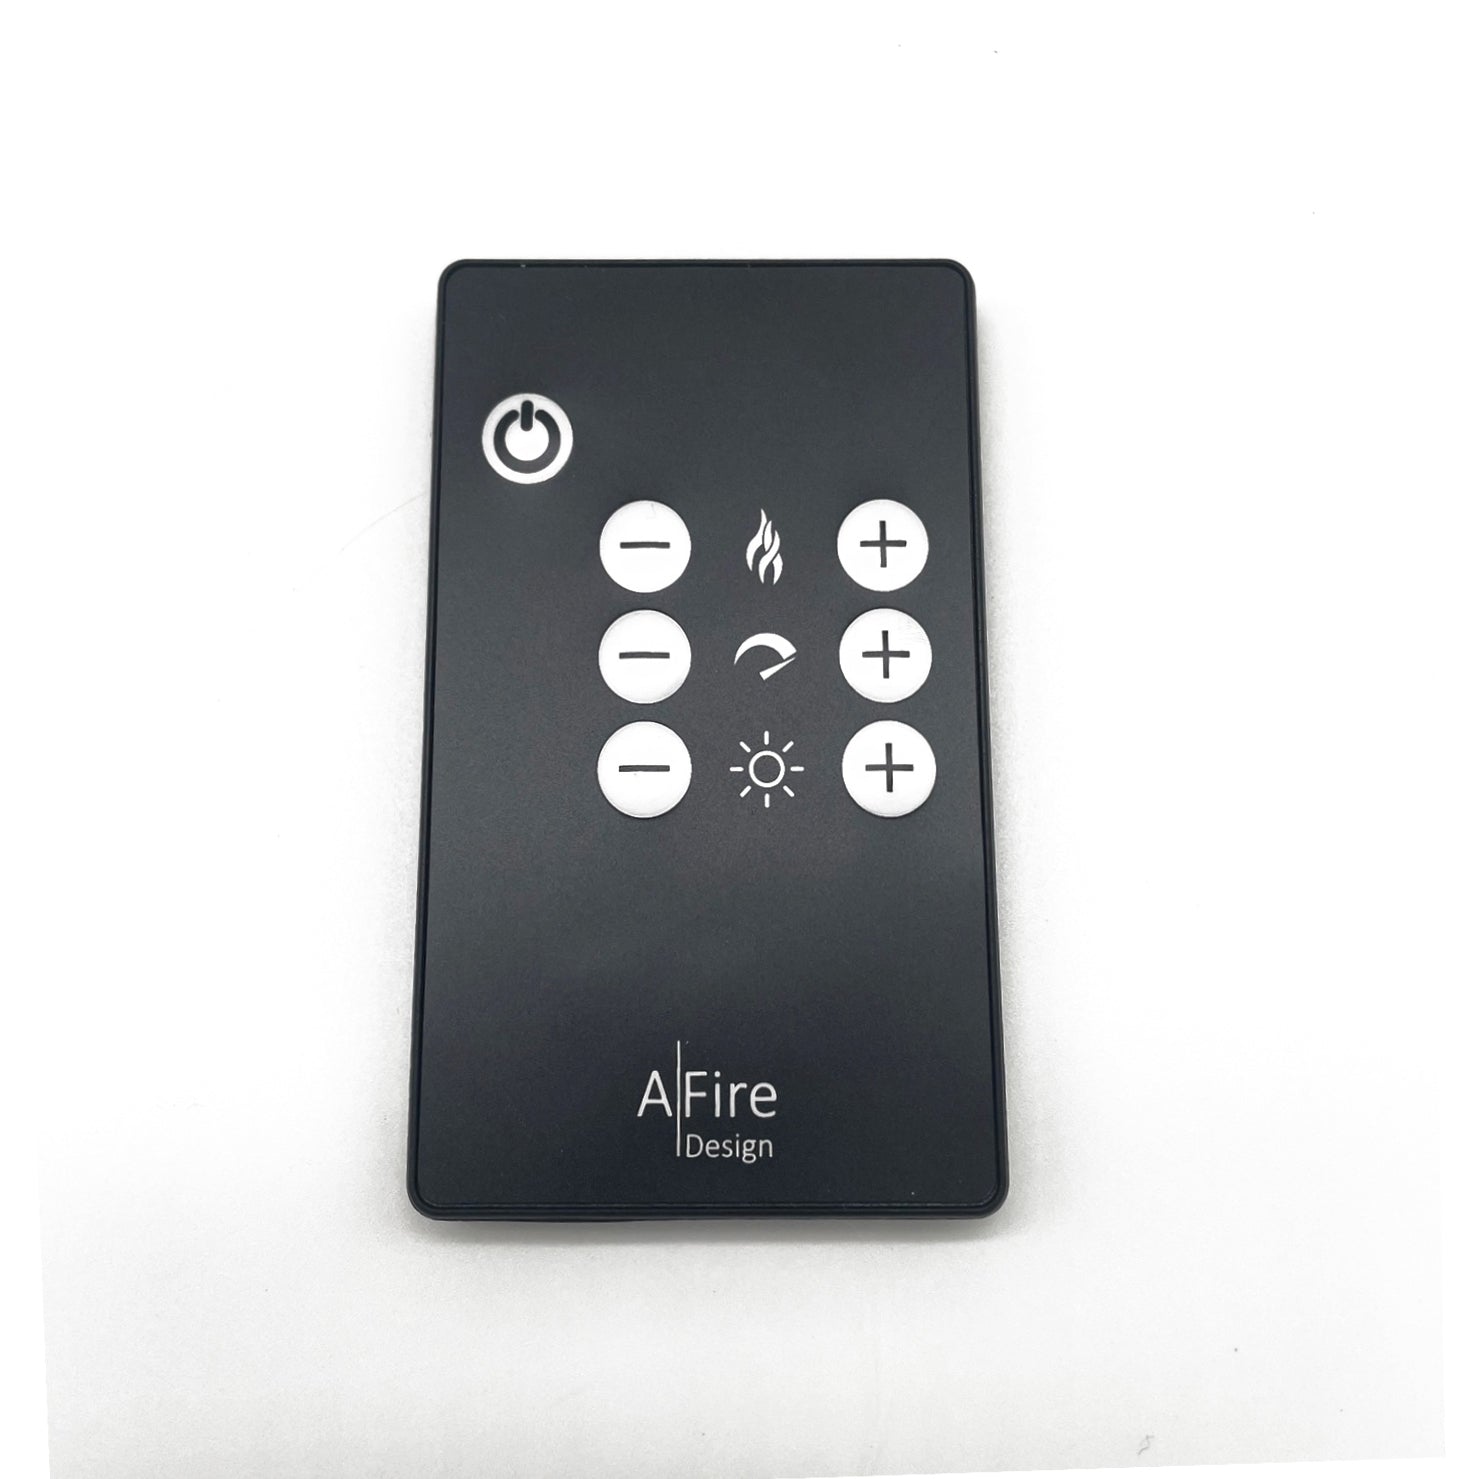 Remote Control for AWA2 Series